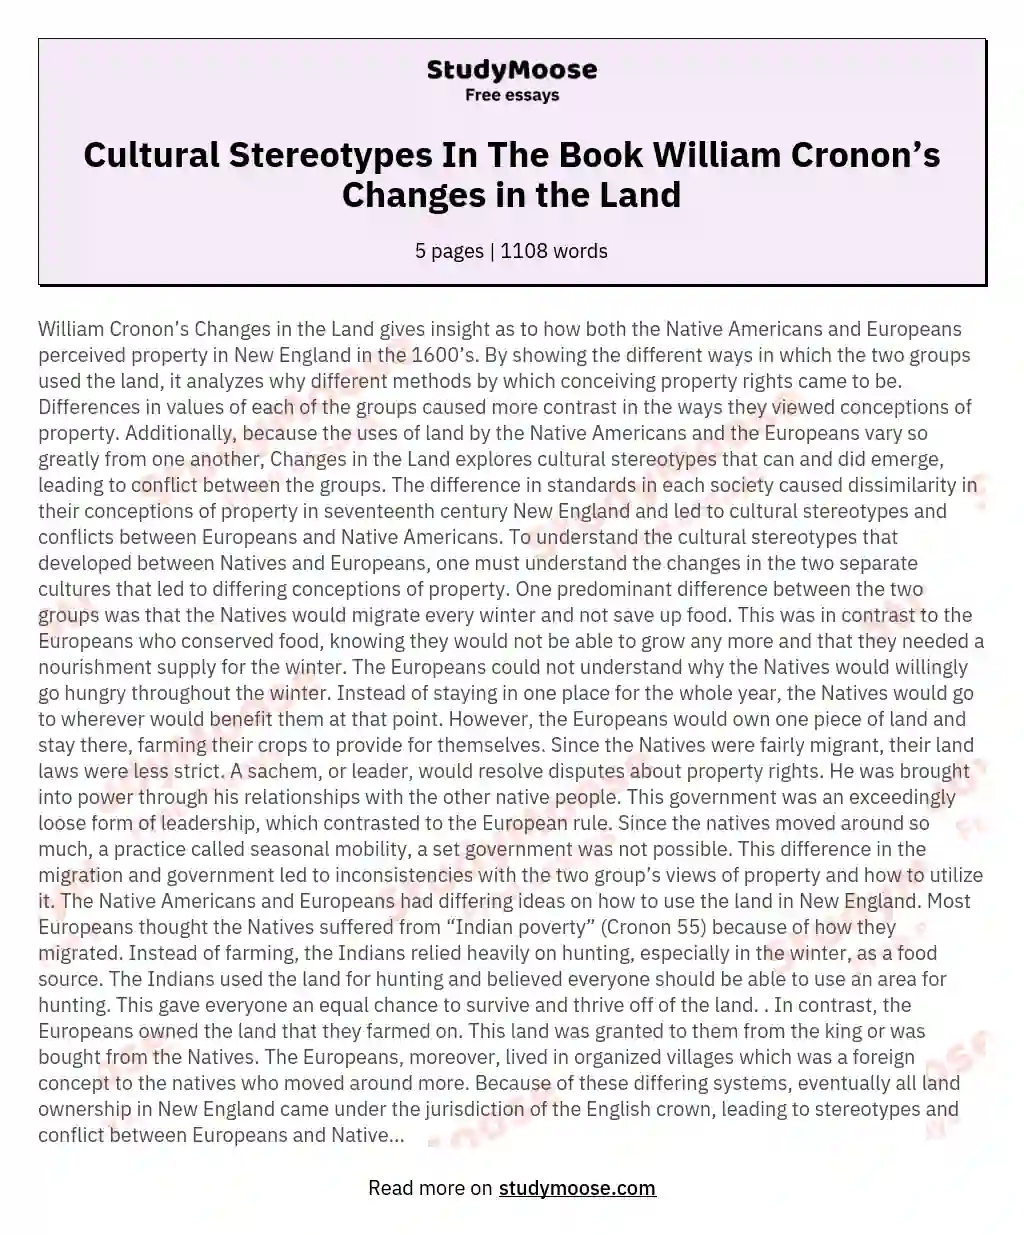 Cultural Stereotypes In The Book William Cronon’s Changes in the Land essay